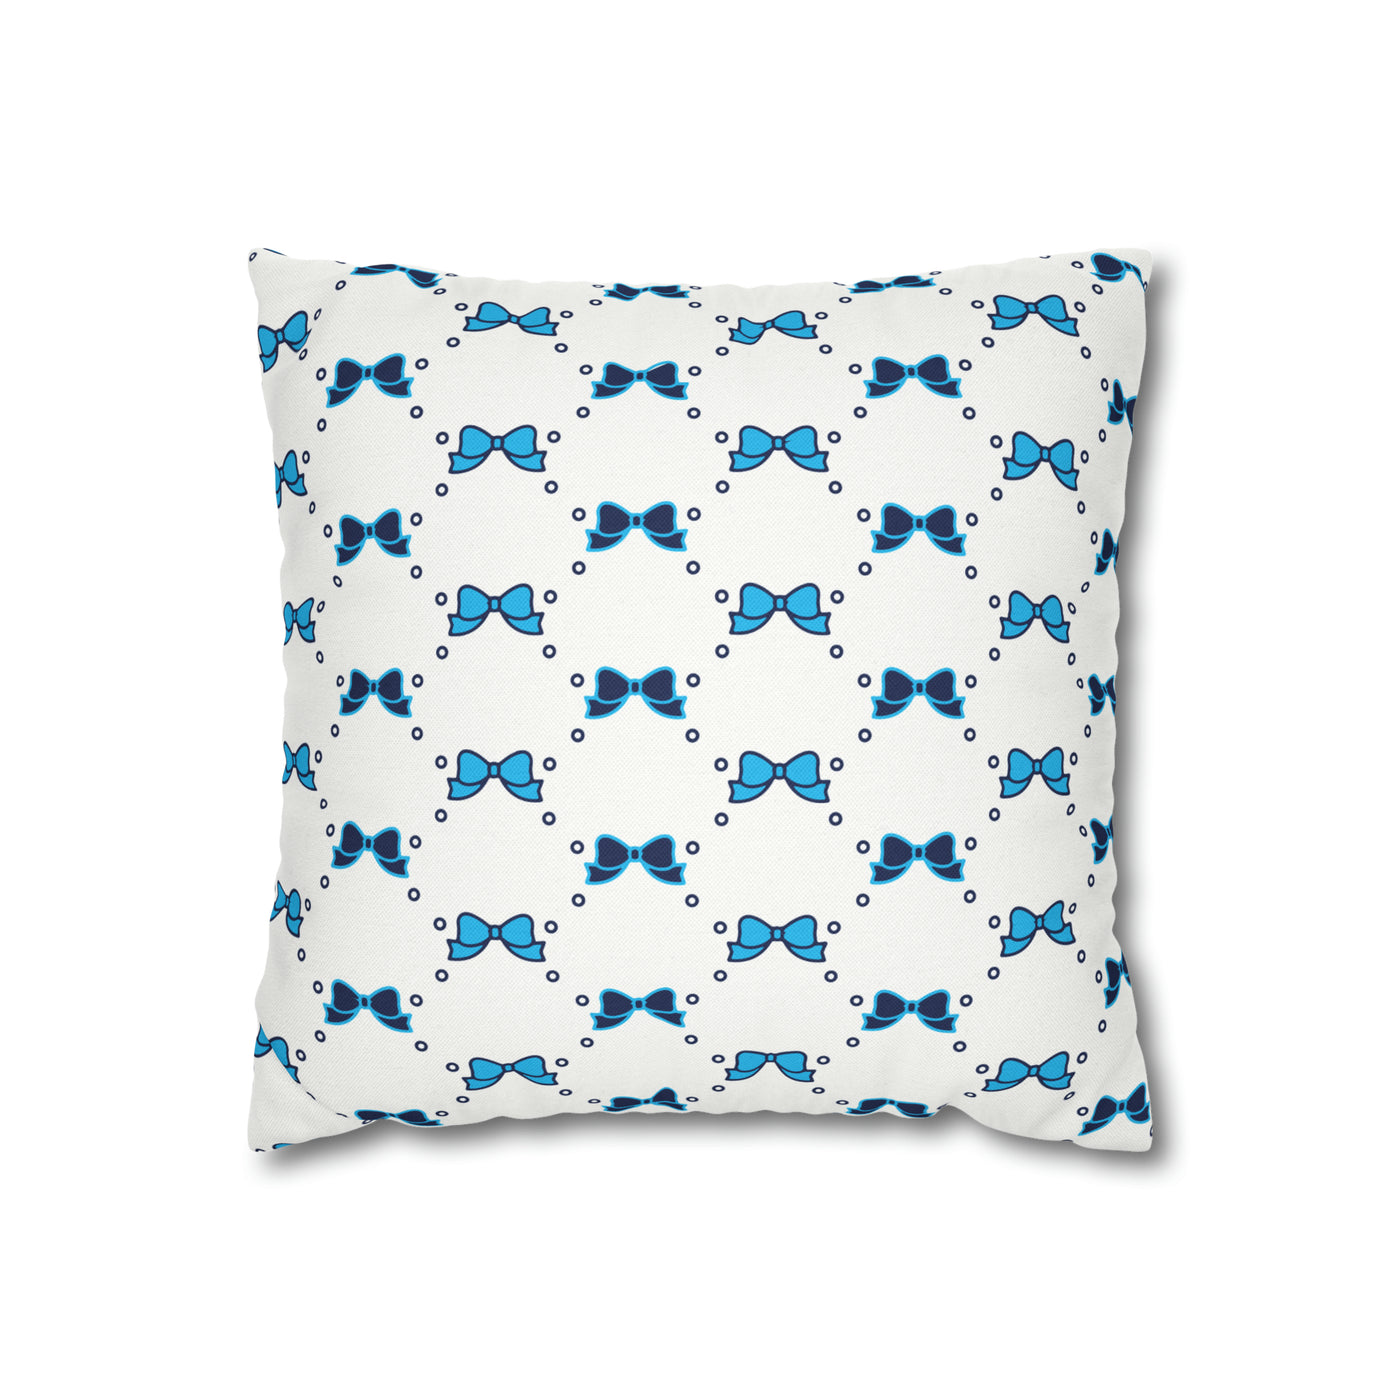 Pretty Little Bow Pillow Cover - Dorm Pillow,Bow Pillow,Bed Party Gift, Acceptance Gift, Camp Gift, Bow Aesthetic, Villanova, PSU, Blue Bow